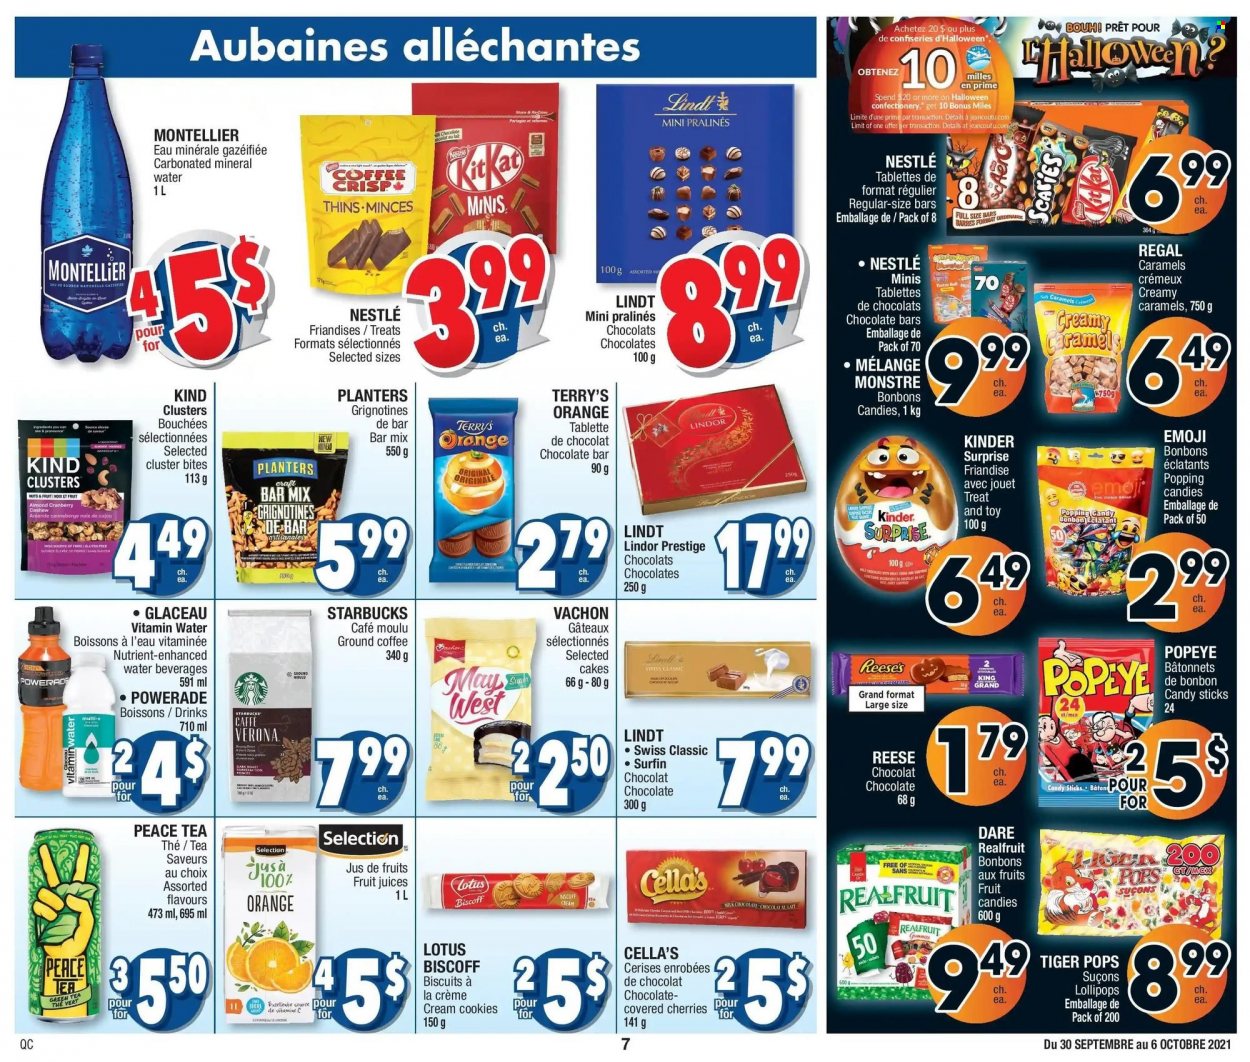 thumbnail - Jean Coutu Flyer - September 30, 2021 - October 06, 2021 - Sales products - cookies, Kinder Surprise, lollipop, Reese's, biscuit, chocolate bar, Thins, Planters, Powerade, juice, mineral water, vitamin water, green tea, tea, coffee, ground coffee, Starbucks, Lotus, toys, Sol, Nestlé, pralines, Lindt, Lindor. Page 7.